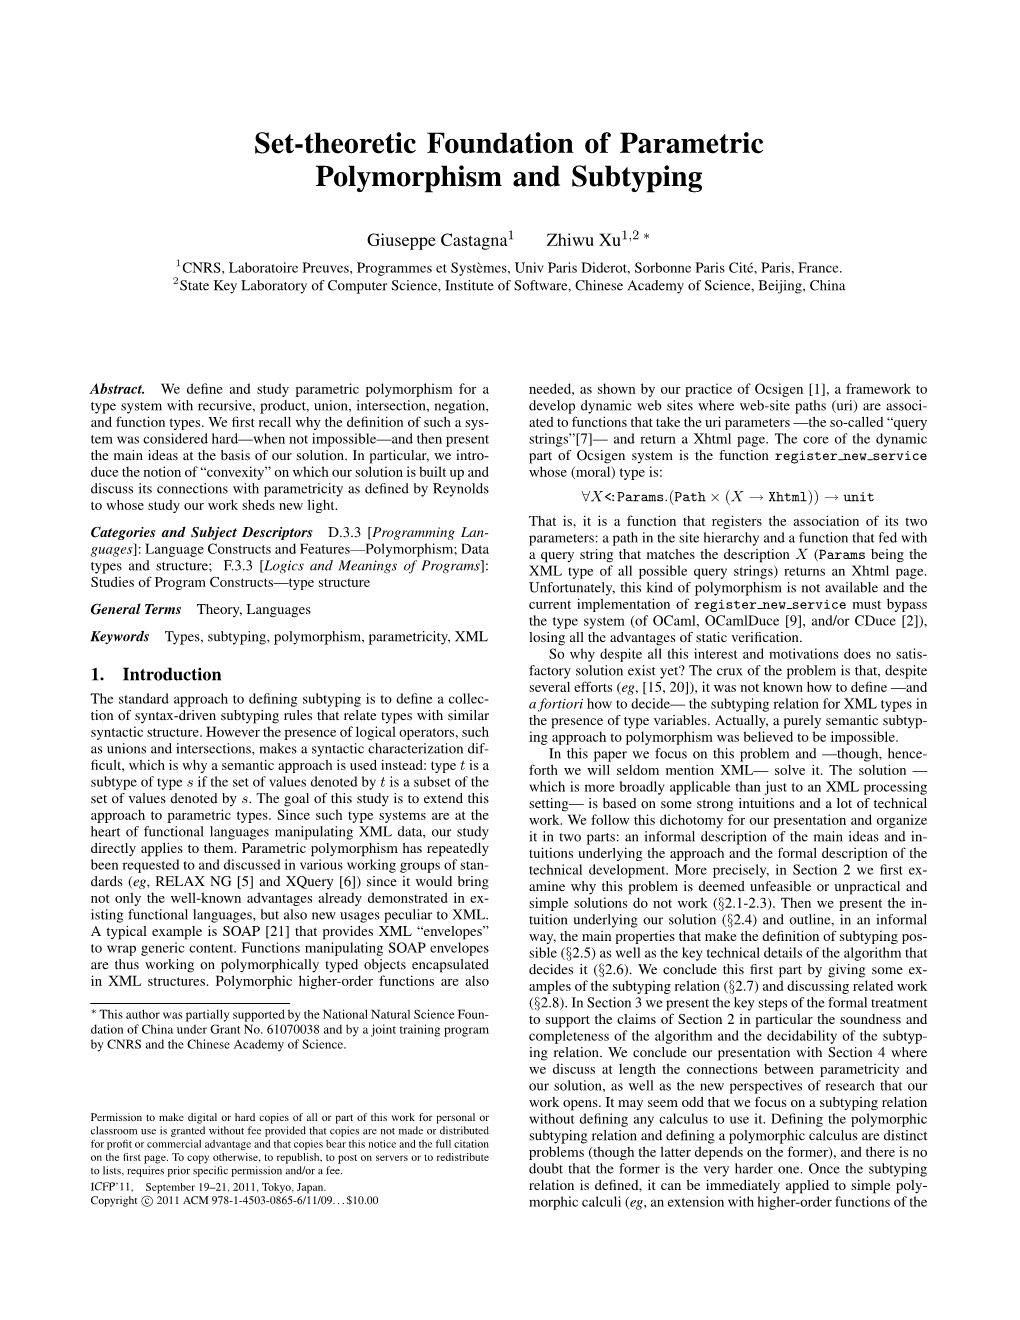 Set-Theoretic Foundation of Parametric Polymorphism and Subtyping